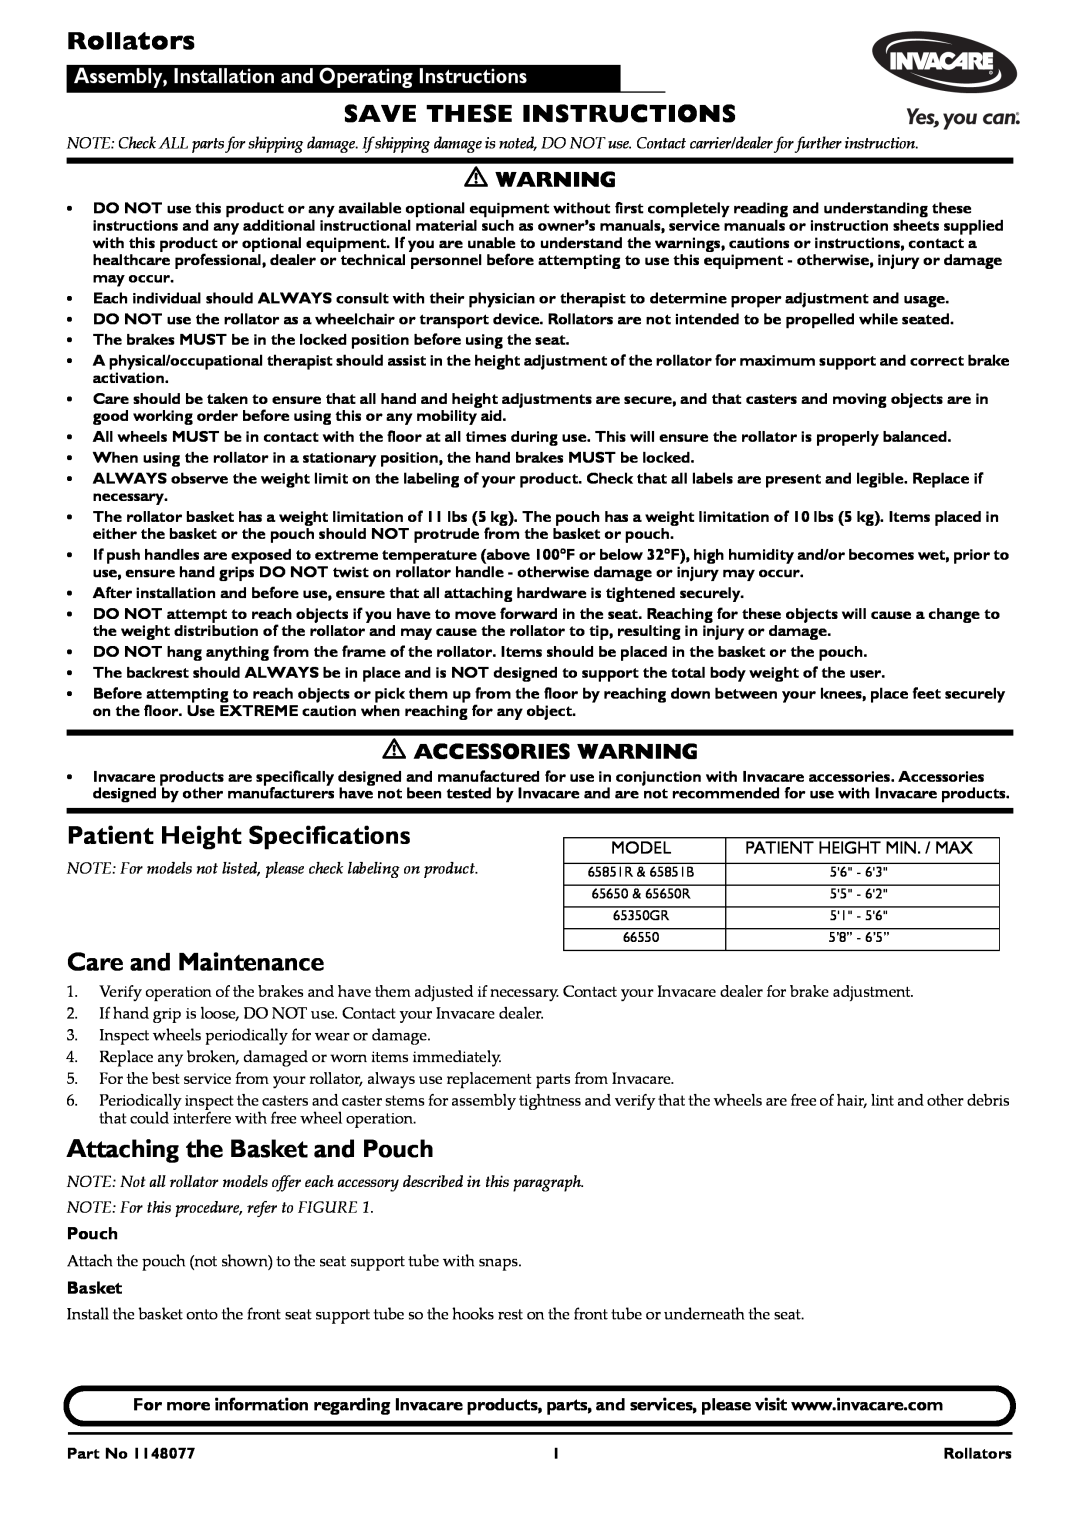 Invacare 65851B specifications Rollators, Save These Instructions, Patient Height Specifications, Care and Maintenance 